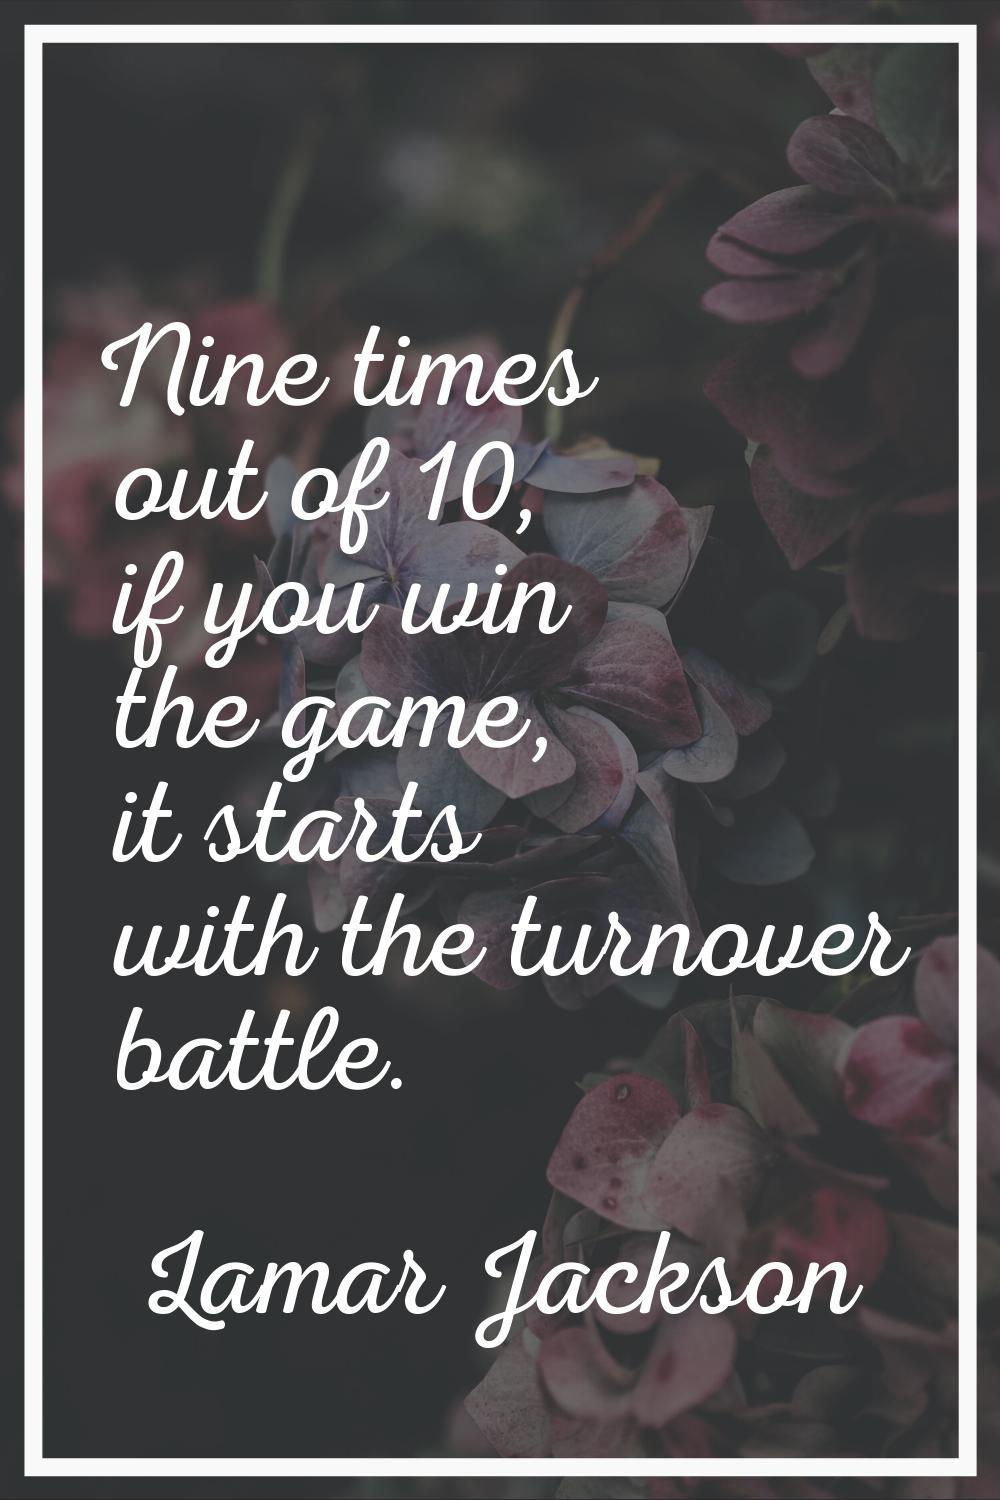 Nine times out of 10, if you win the game, it starts with the turnover battle.